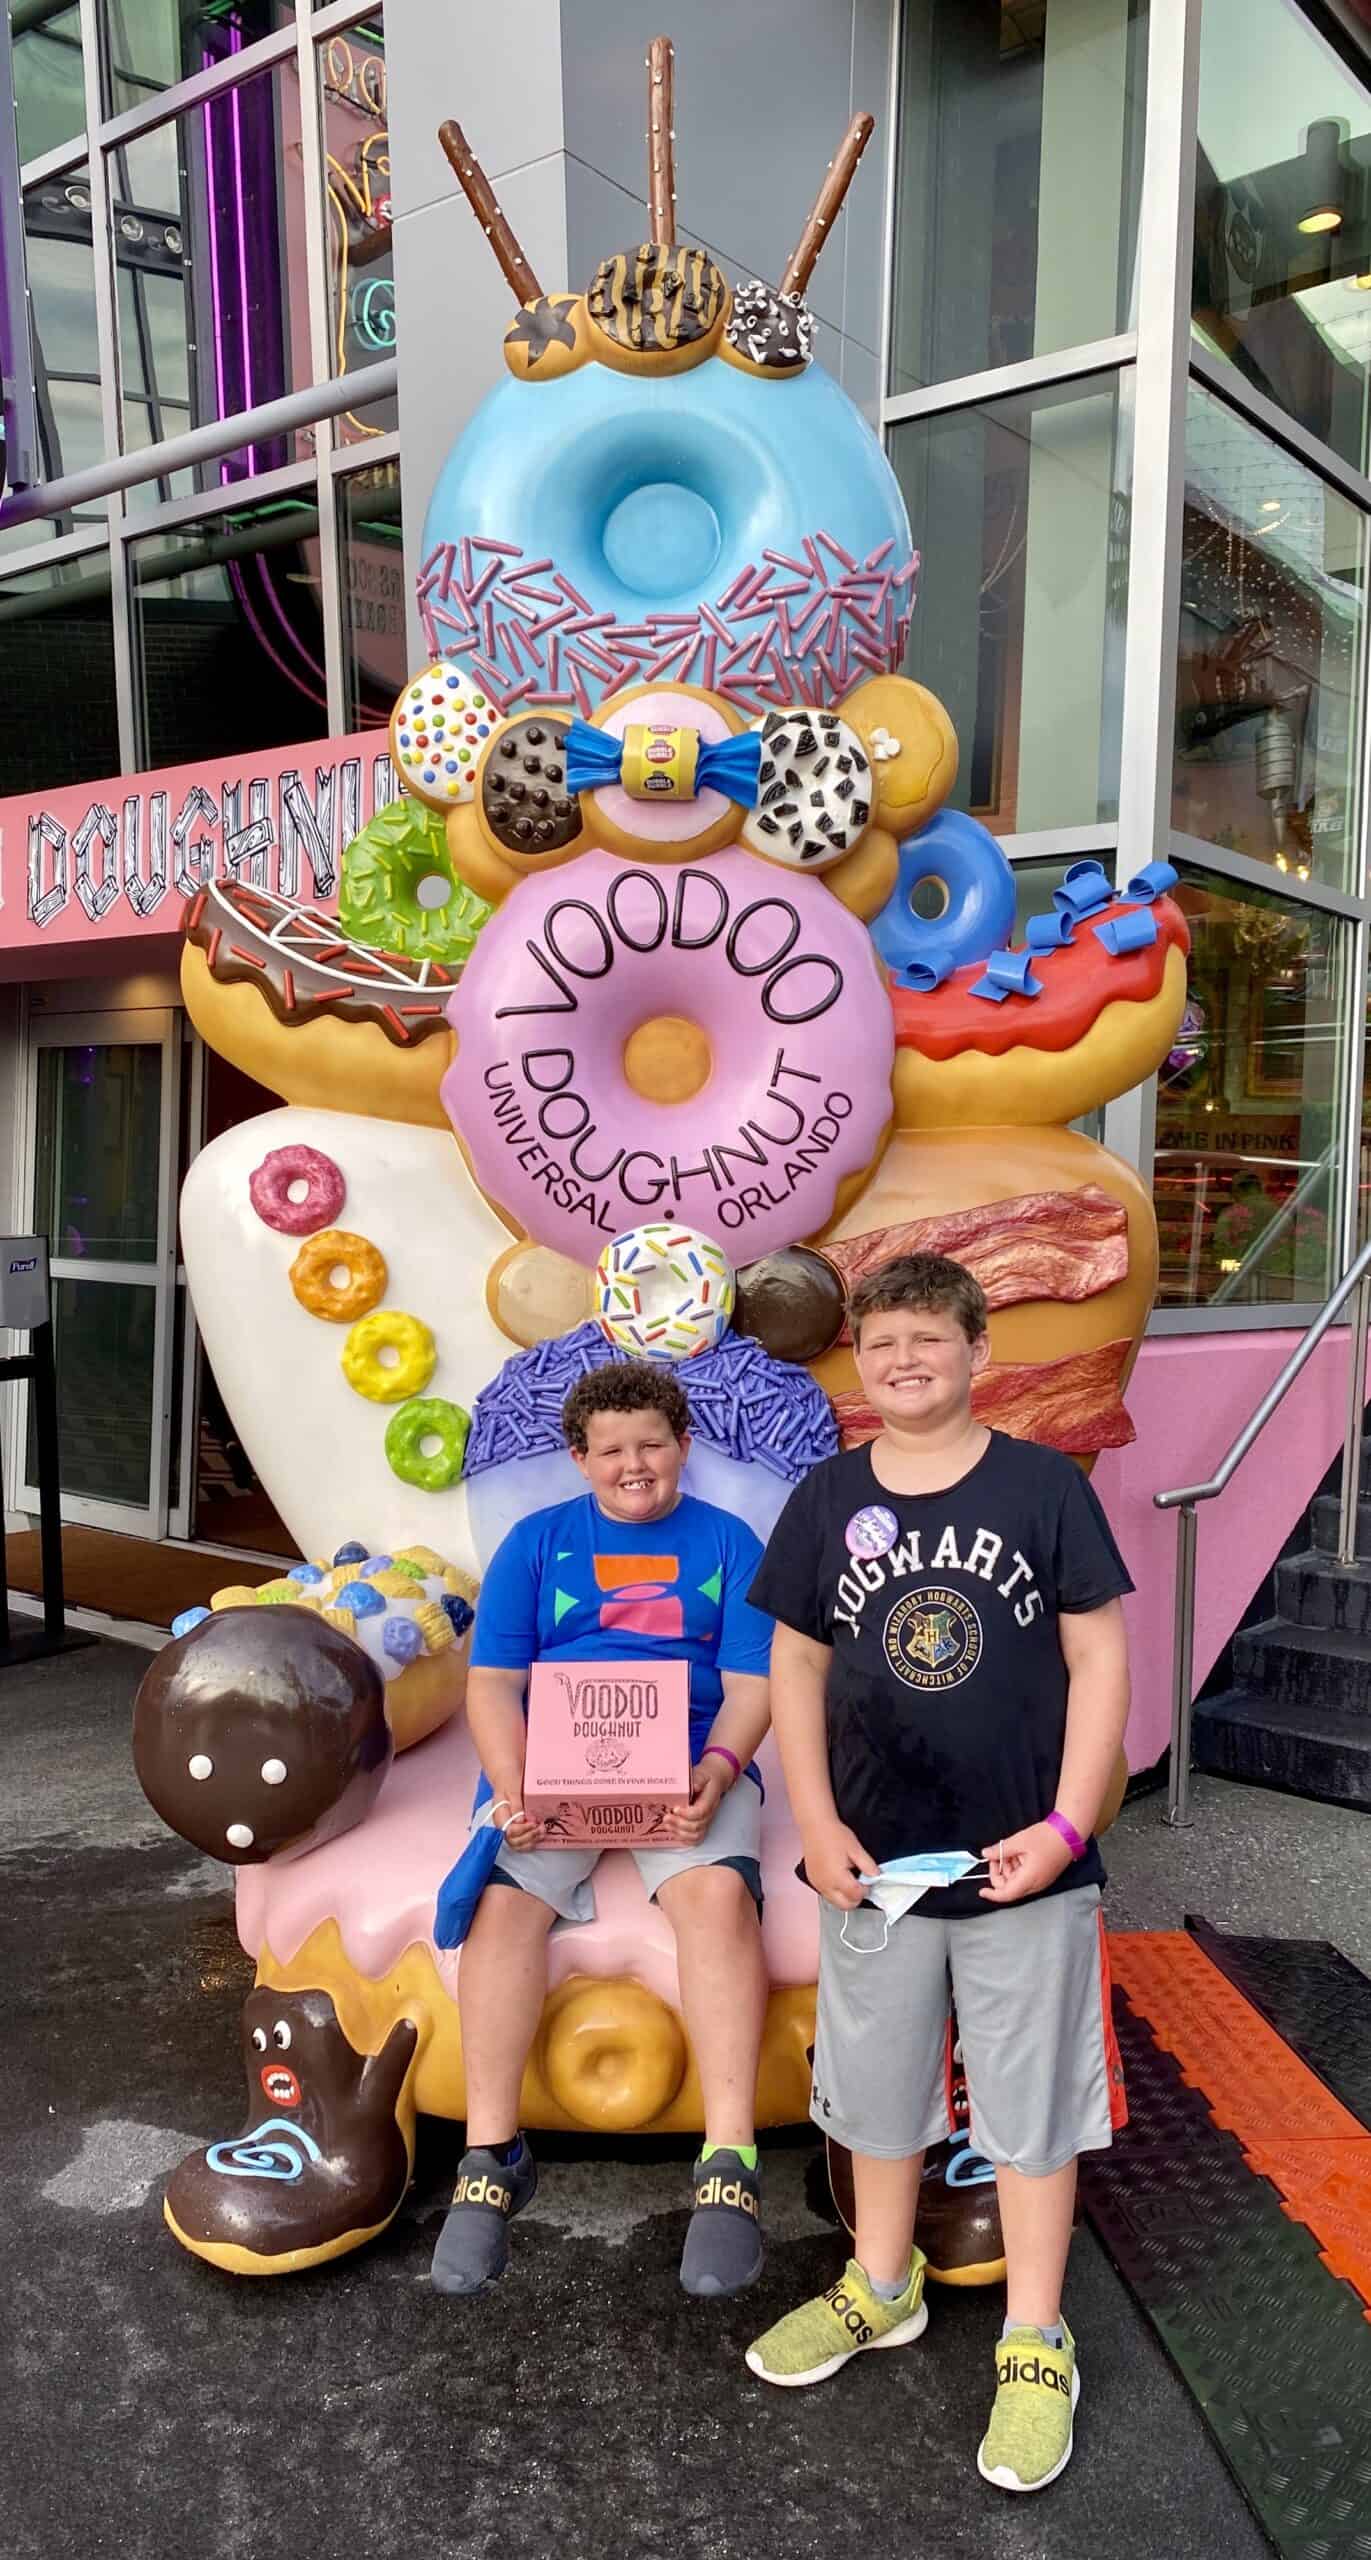 Donut Statue scaled